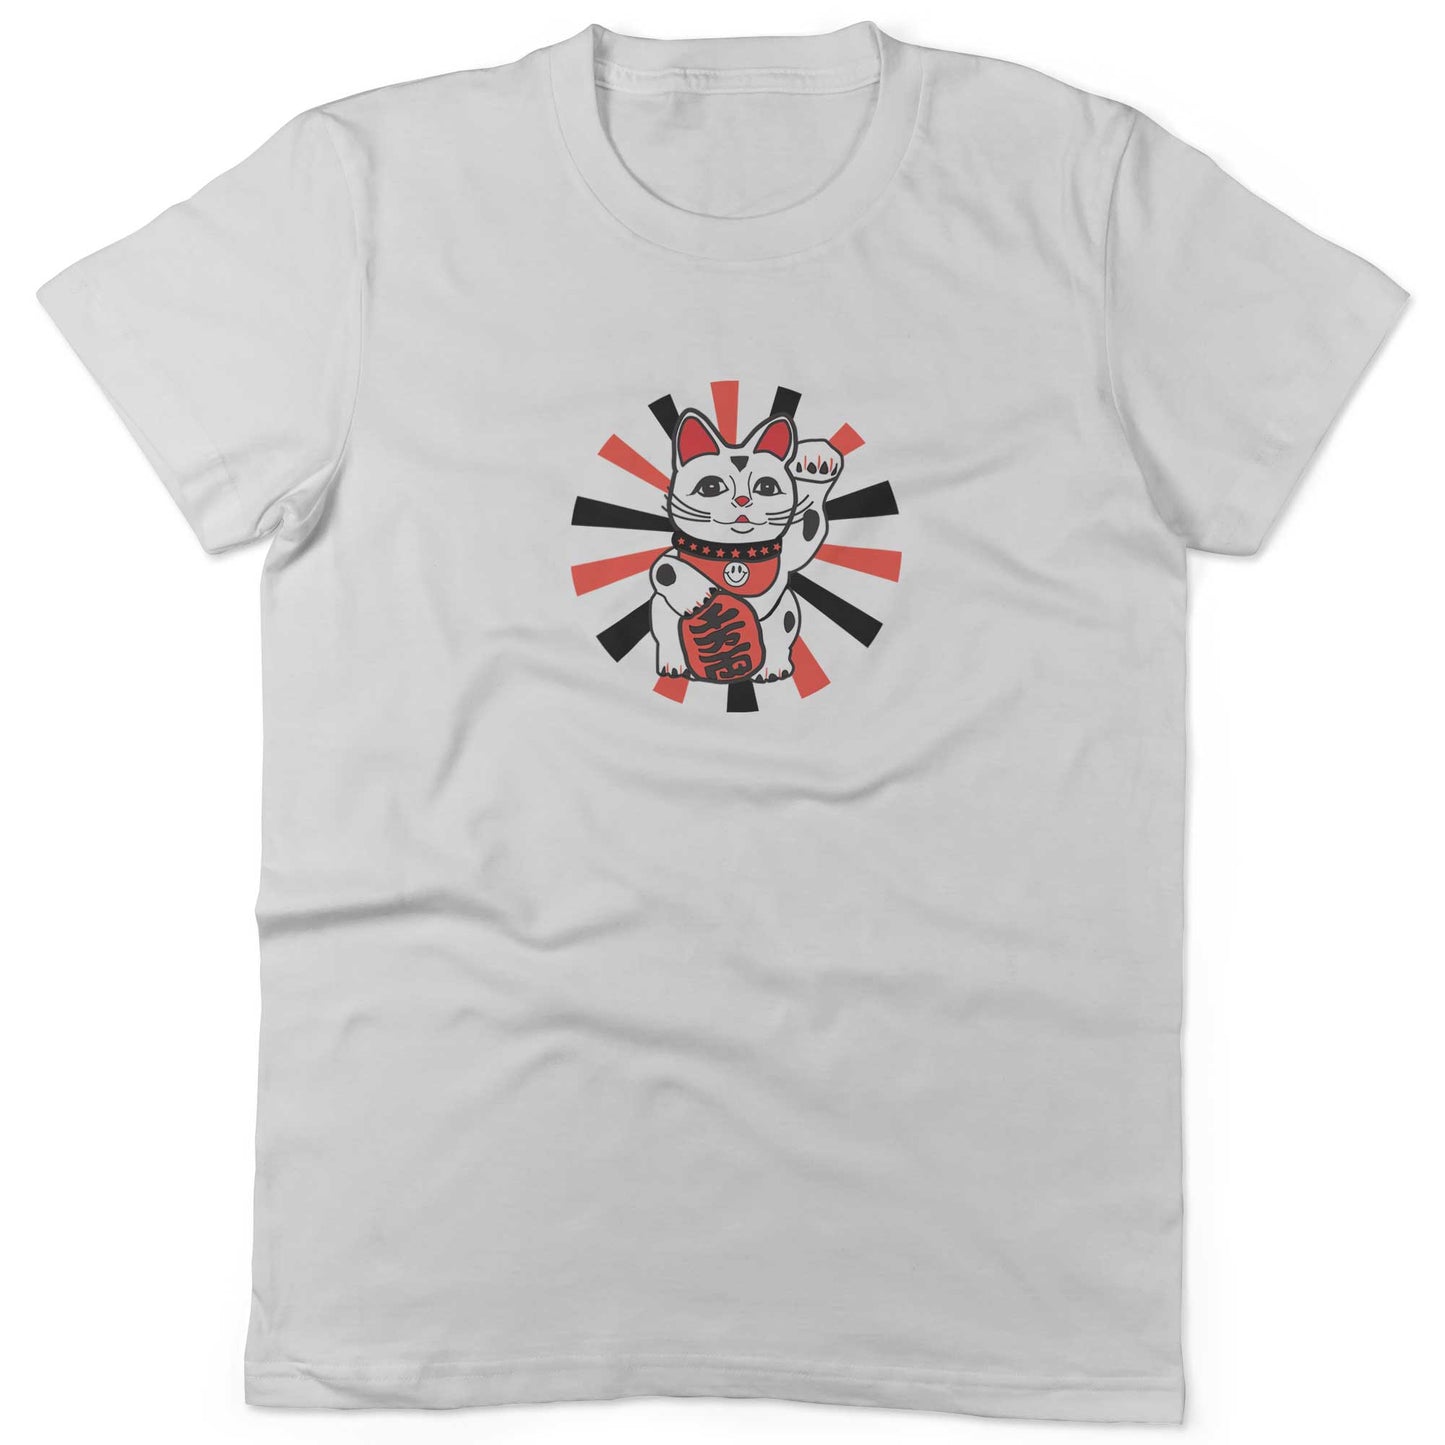 Japanese Lucky Cat Unisex Or Women's Cotton T-shirt-White-Woman